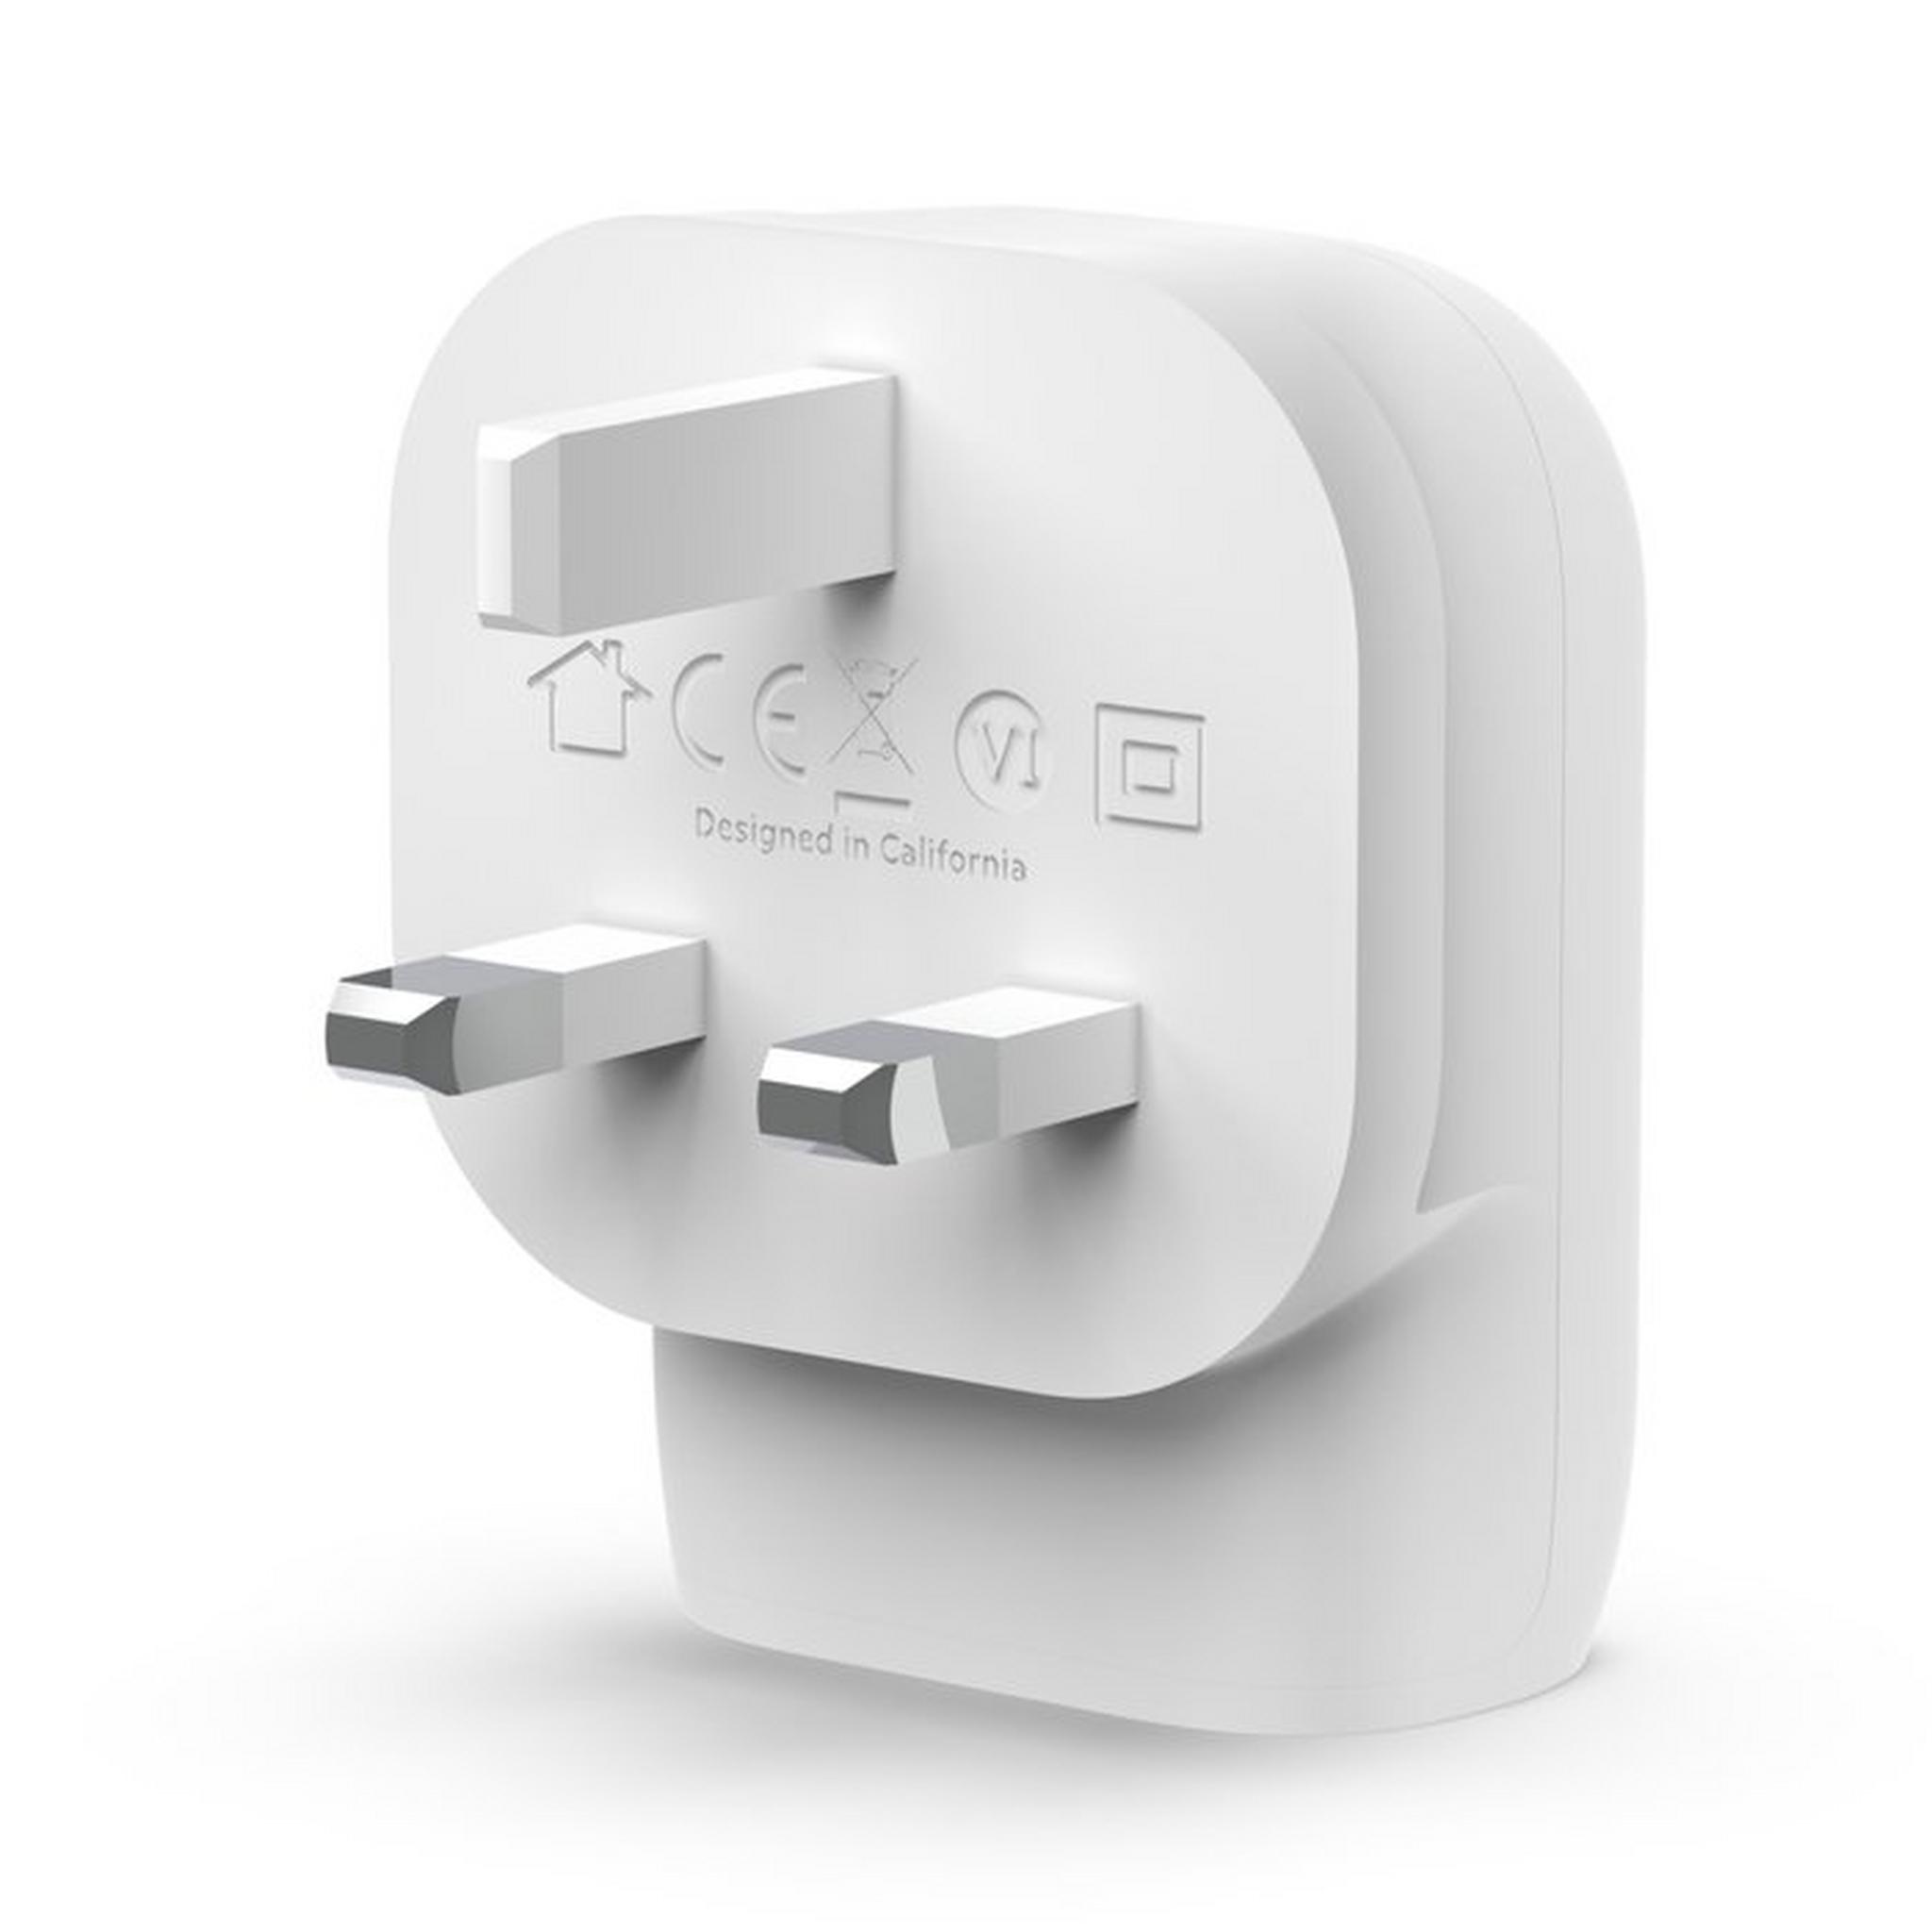 Belkin USB-C PD 3.0 PPS Wall Charger 30W + USB-C to USB-C Cable, WCA005MY1MWH-B6 – White